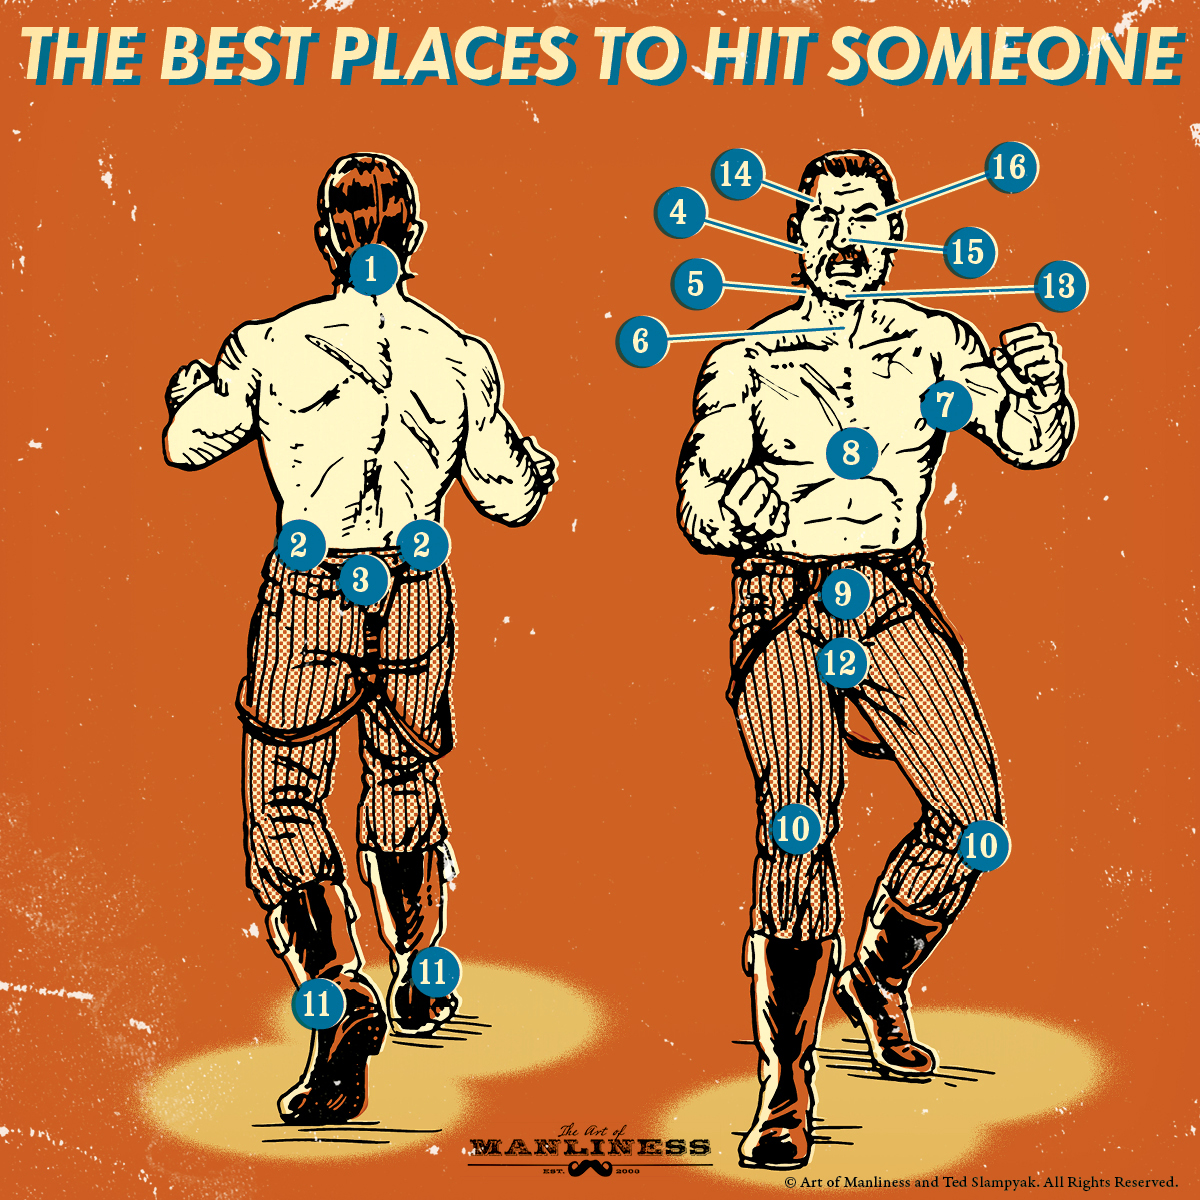 Illustration show body parts to hit someone to inflict the most damage.